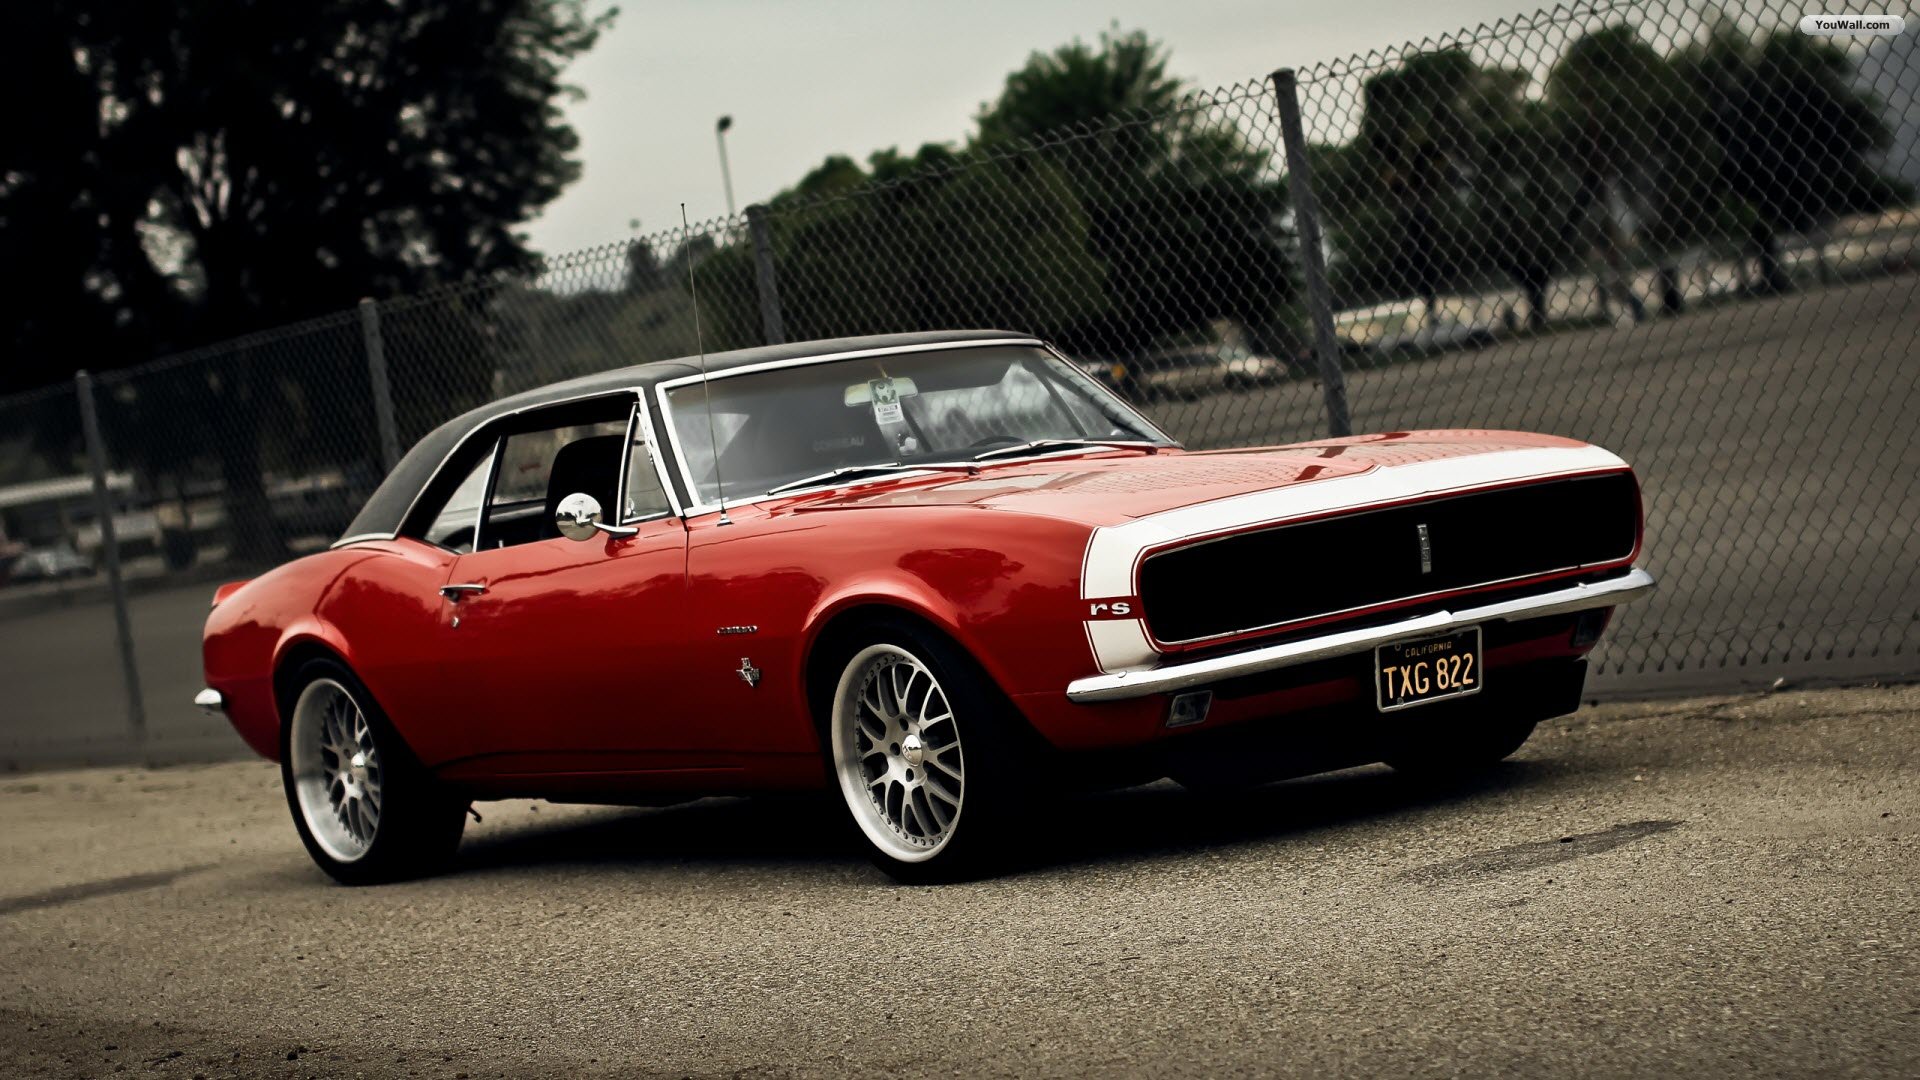 Red Muscle Car Wallpaper High Resolution Size